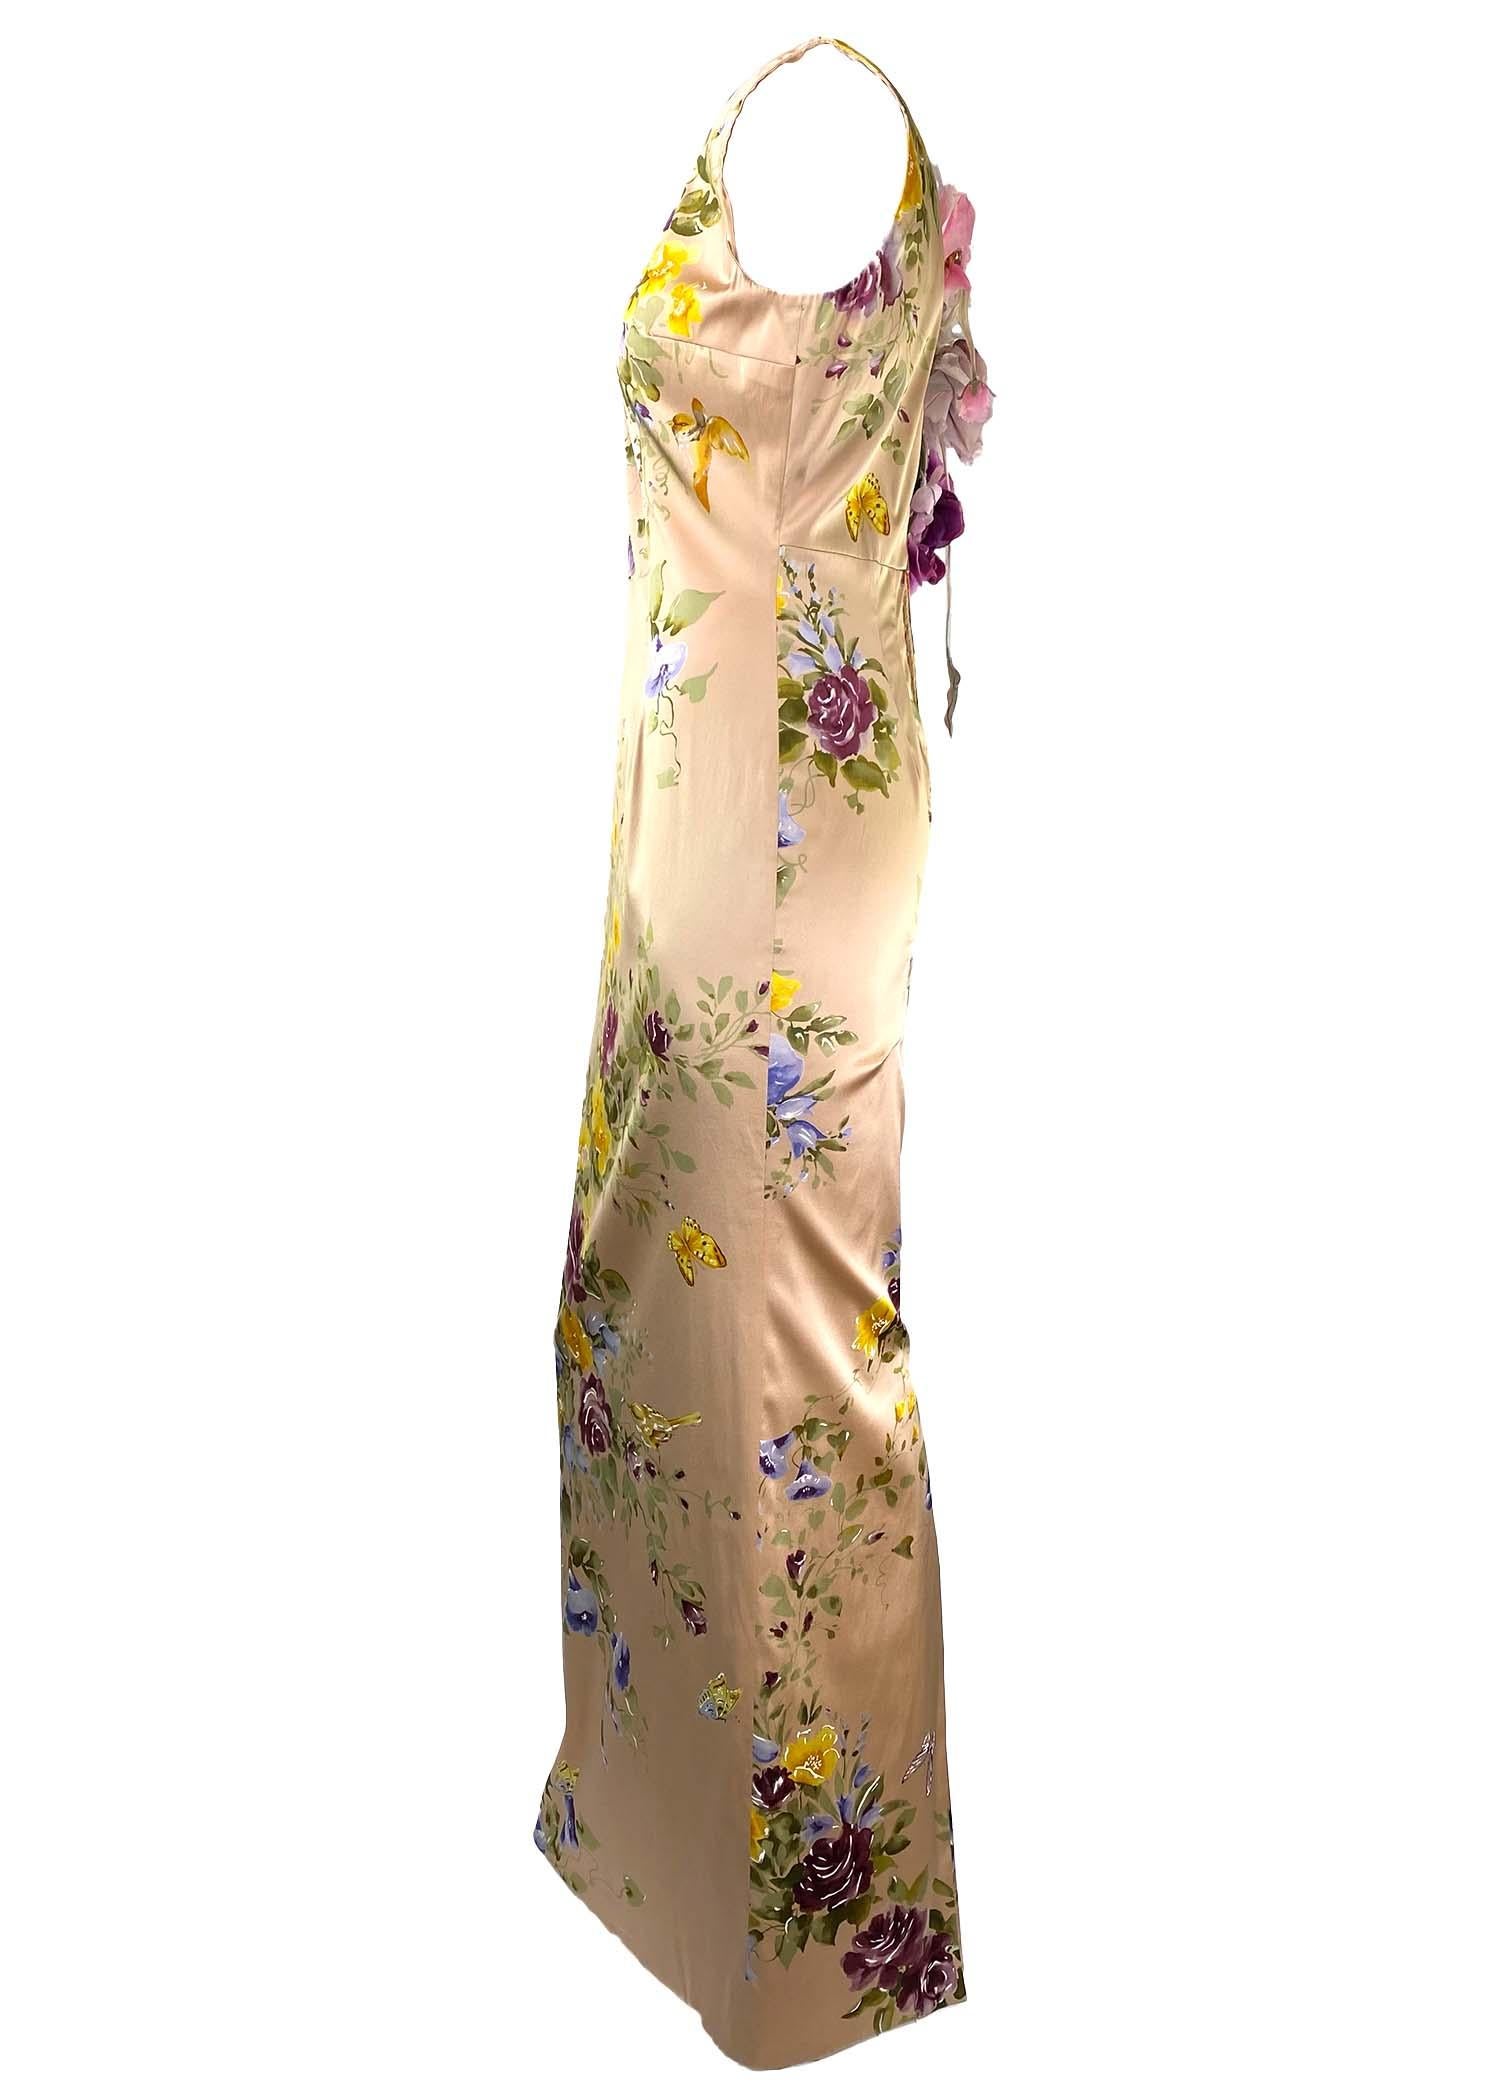 F/W 1998 Dolce & Gabbana Painted Floral Applique Dress Runway 1